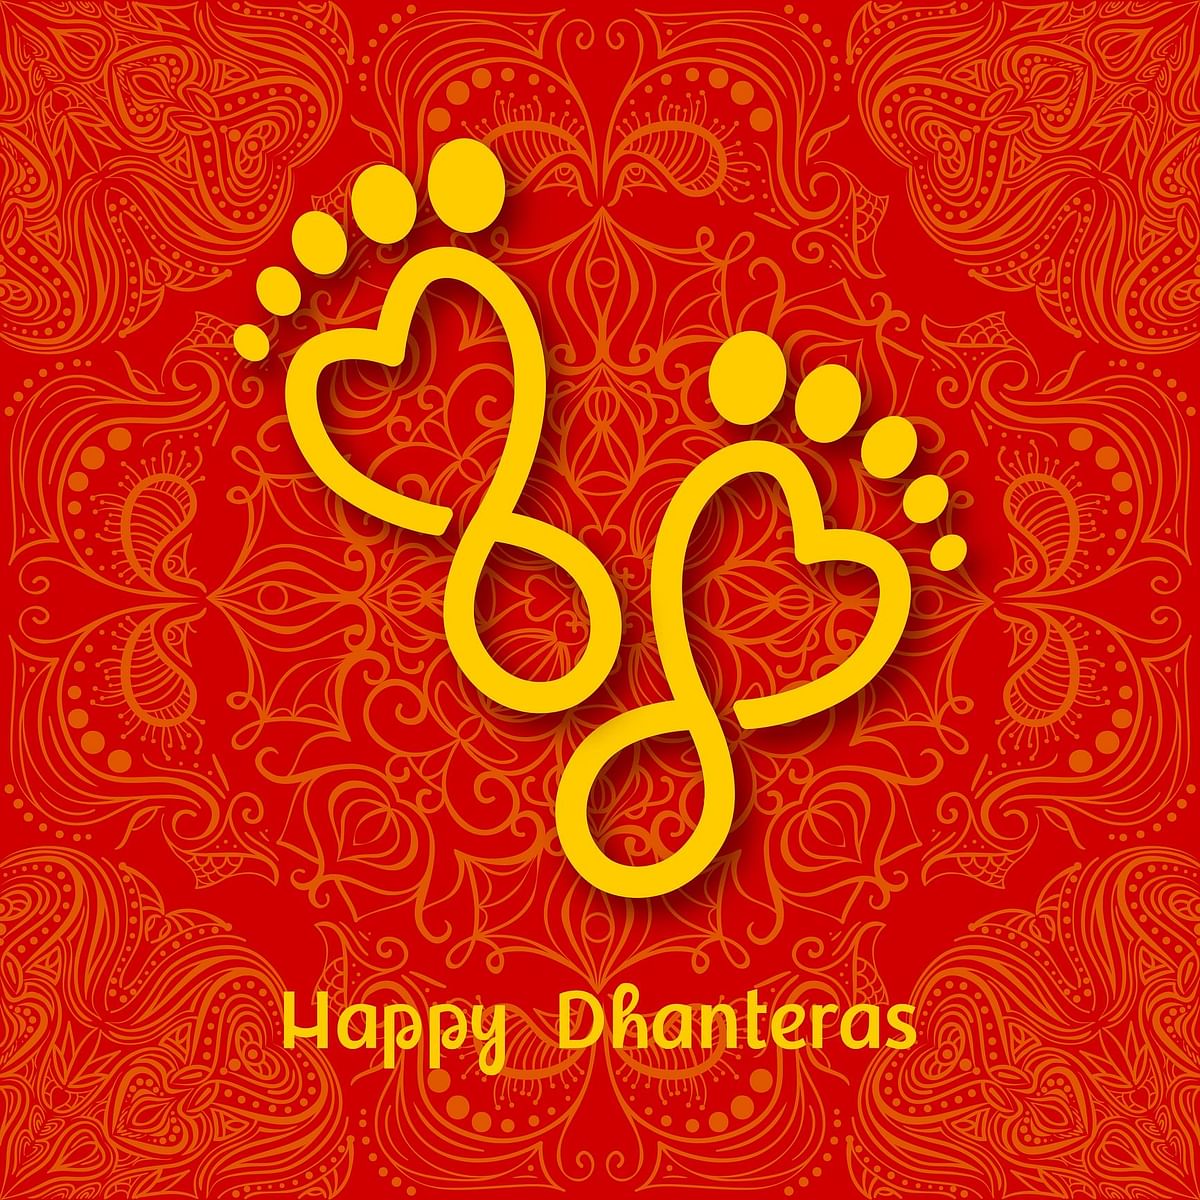 Here are some wishes, images, quotes and greetings for the occasion of Dhanteras.